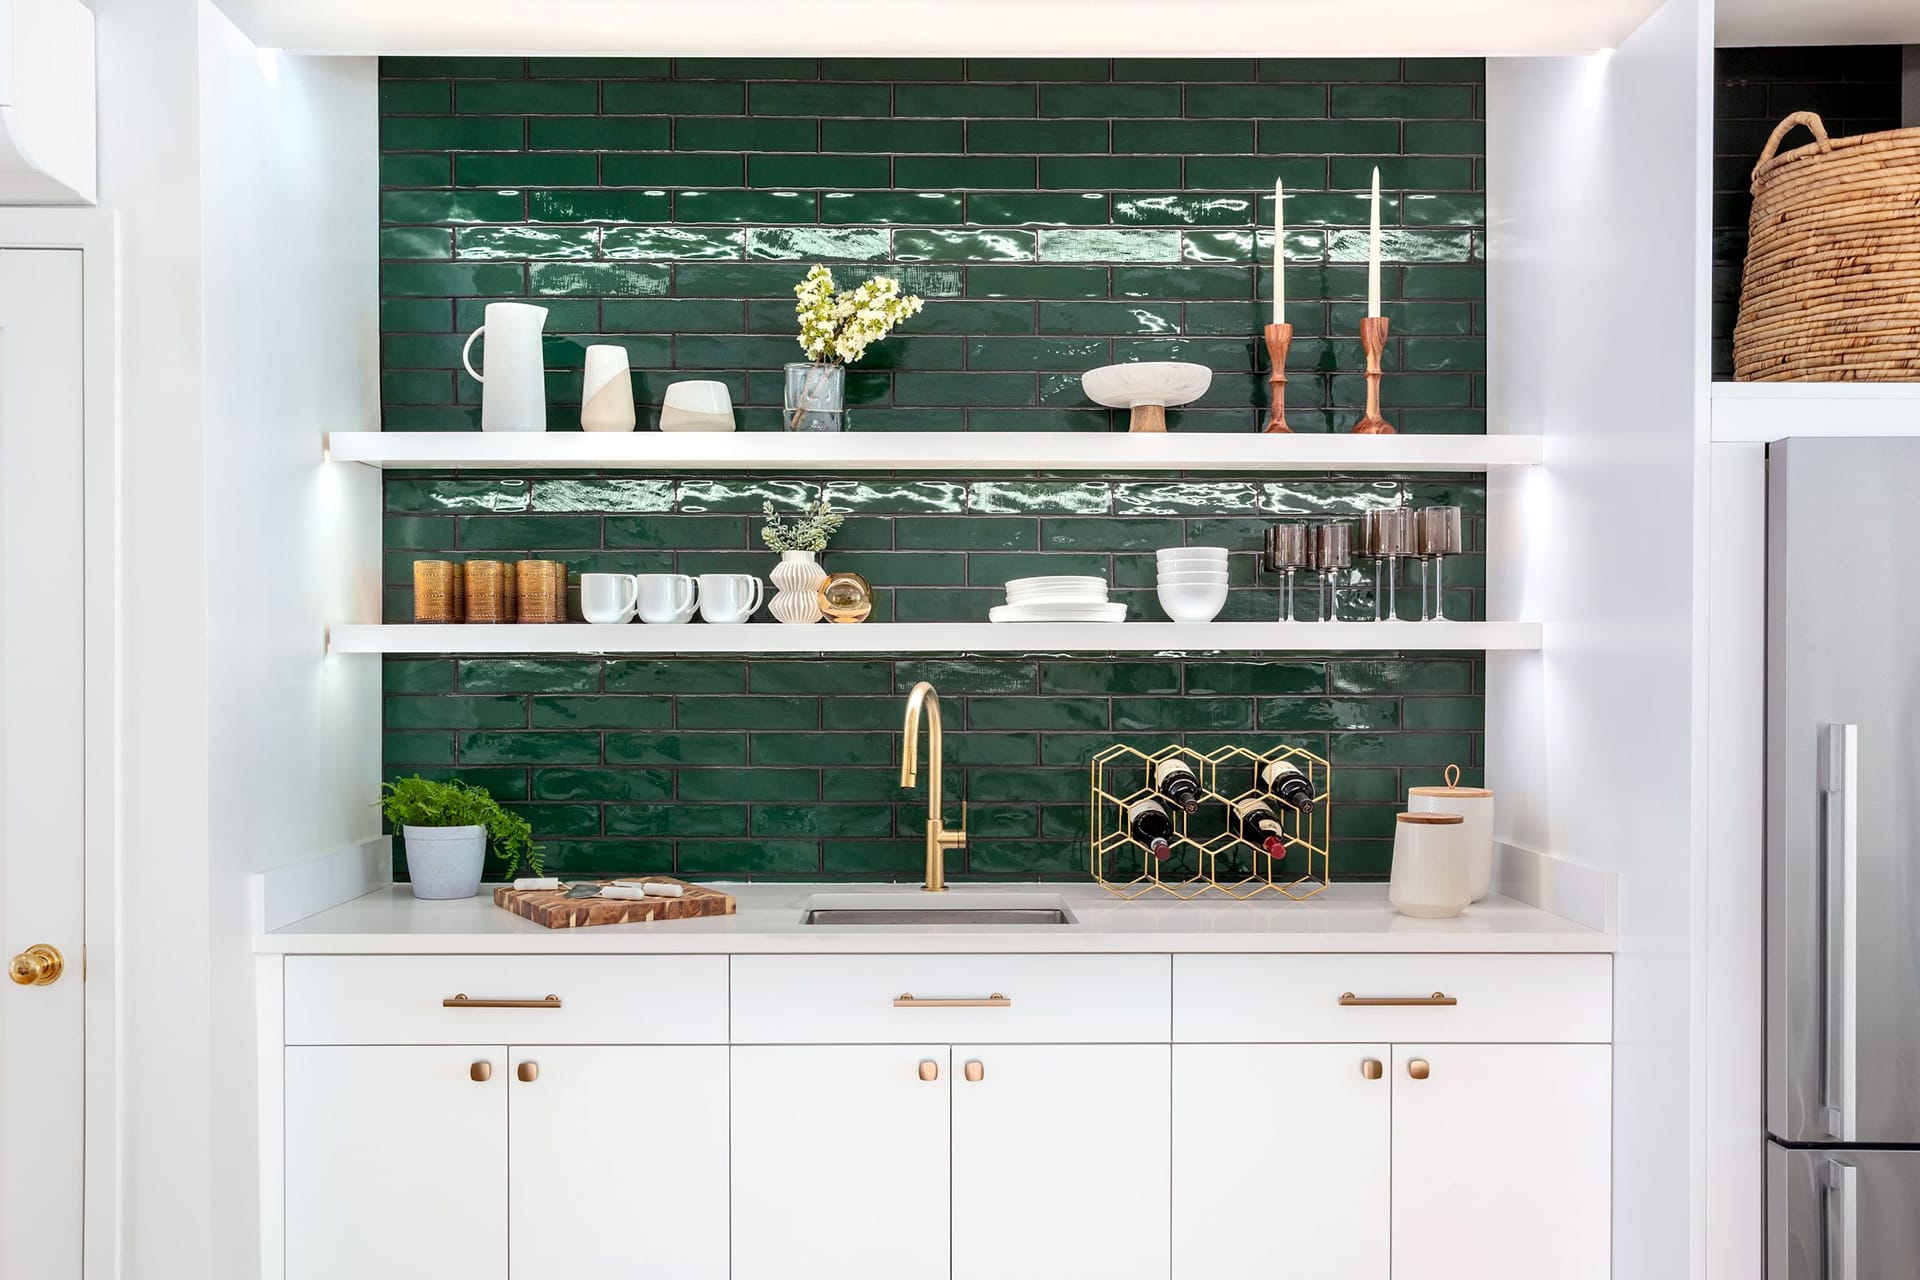 Kitchenette with gold fixtures, will millwork, green subway tiles, and various dishes and other objects.